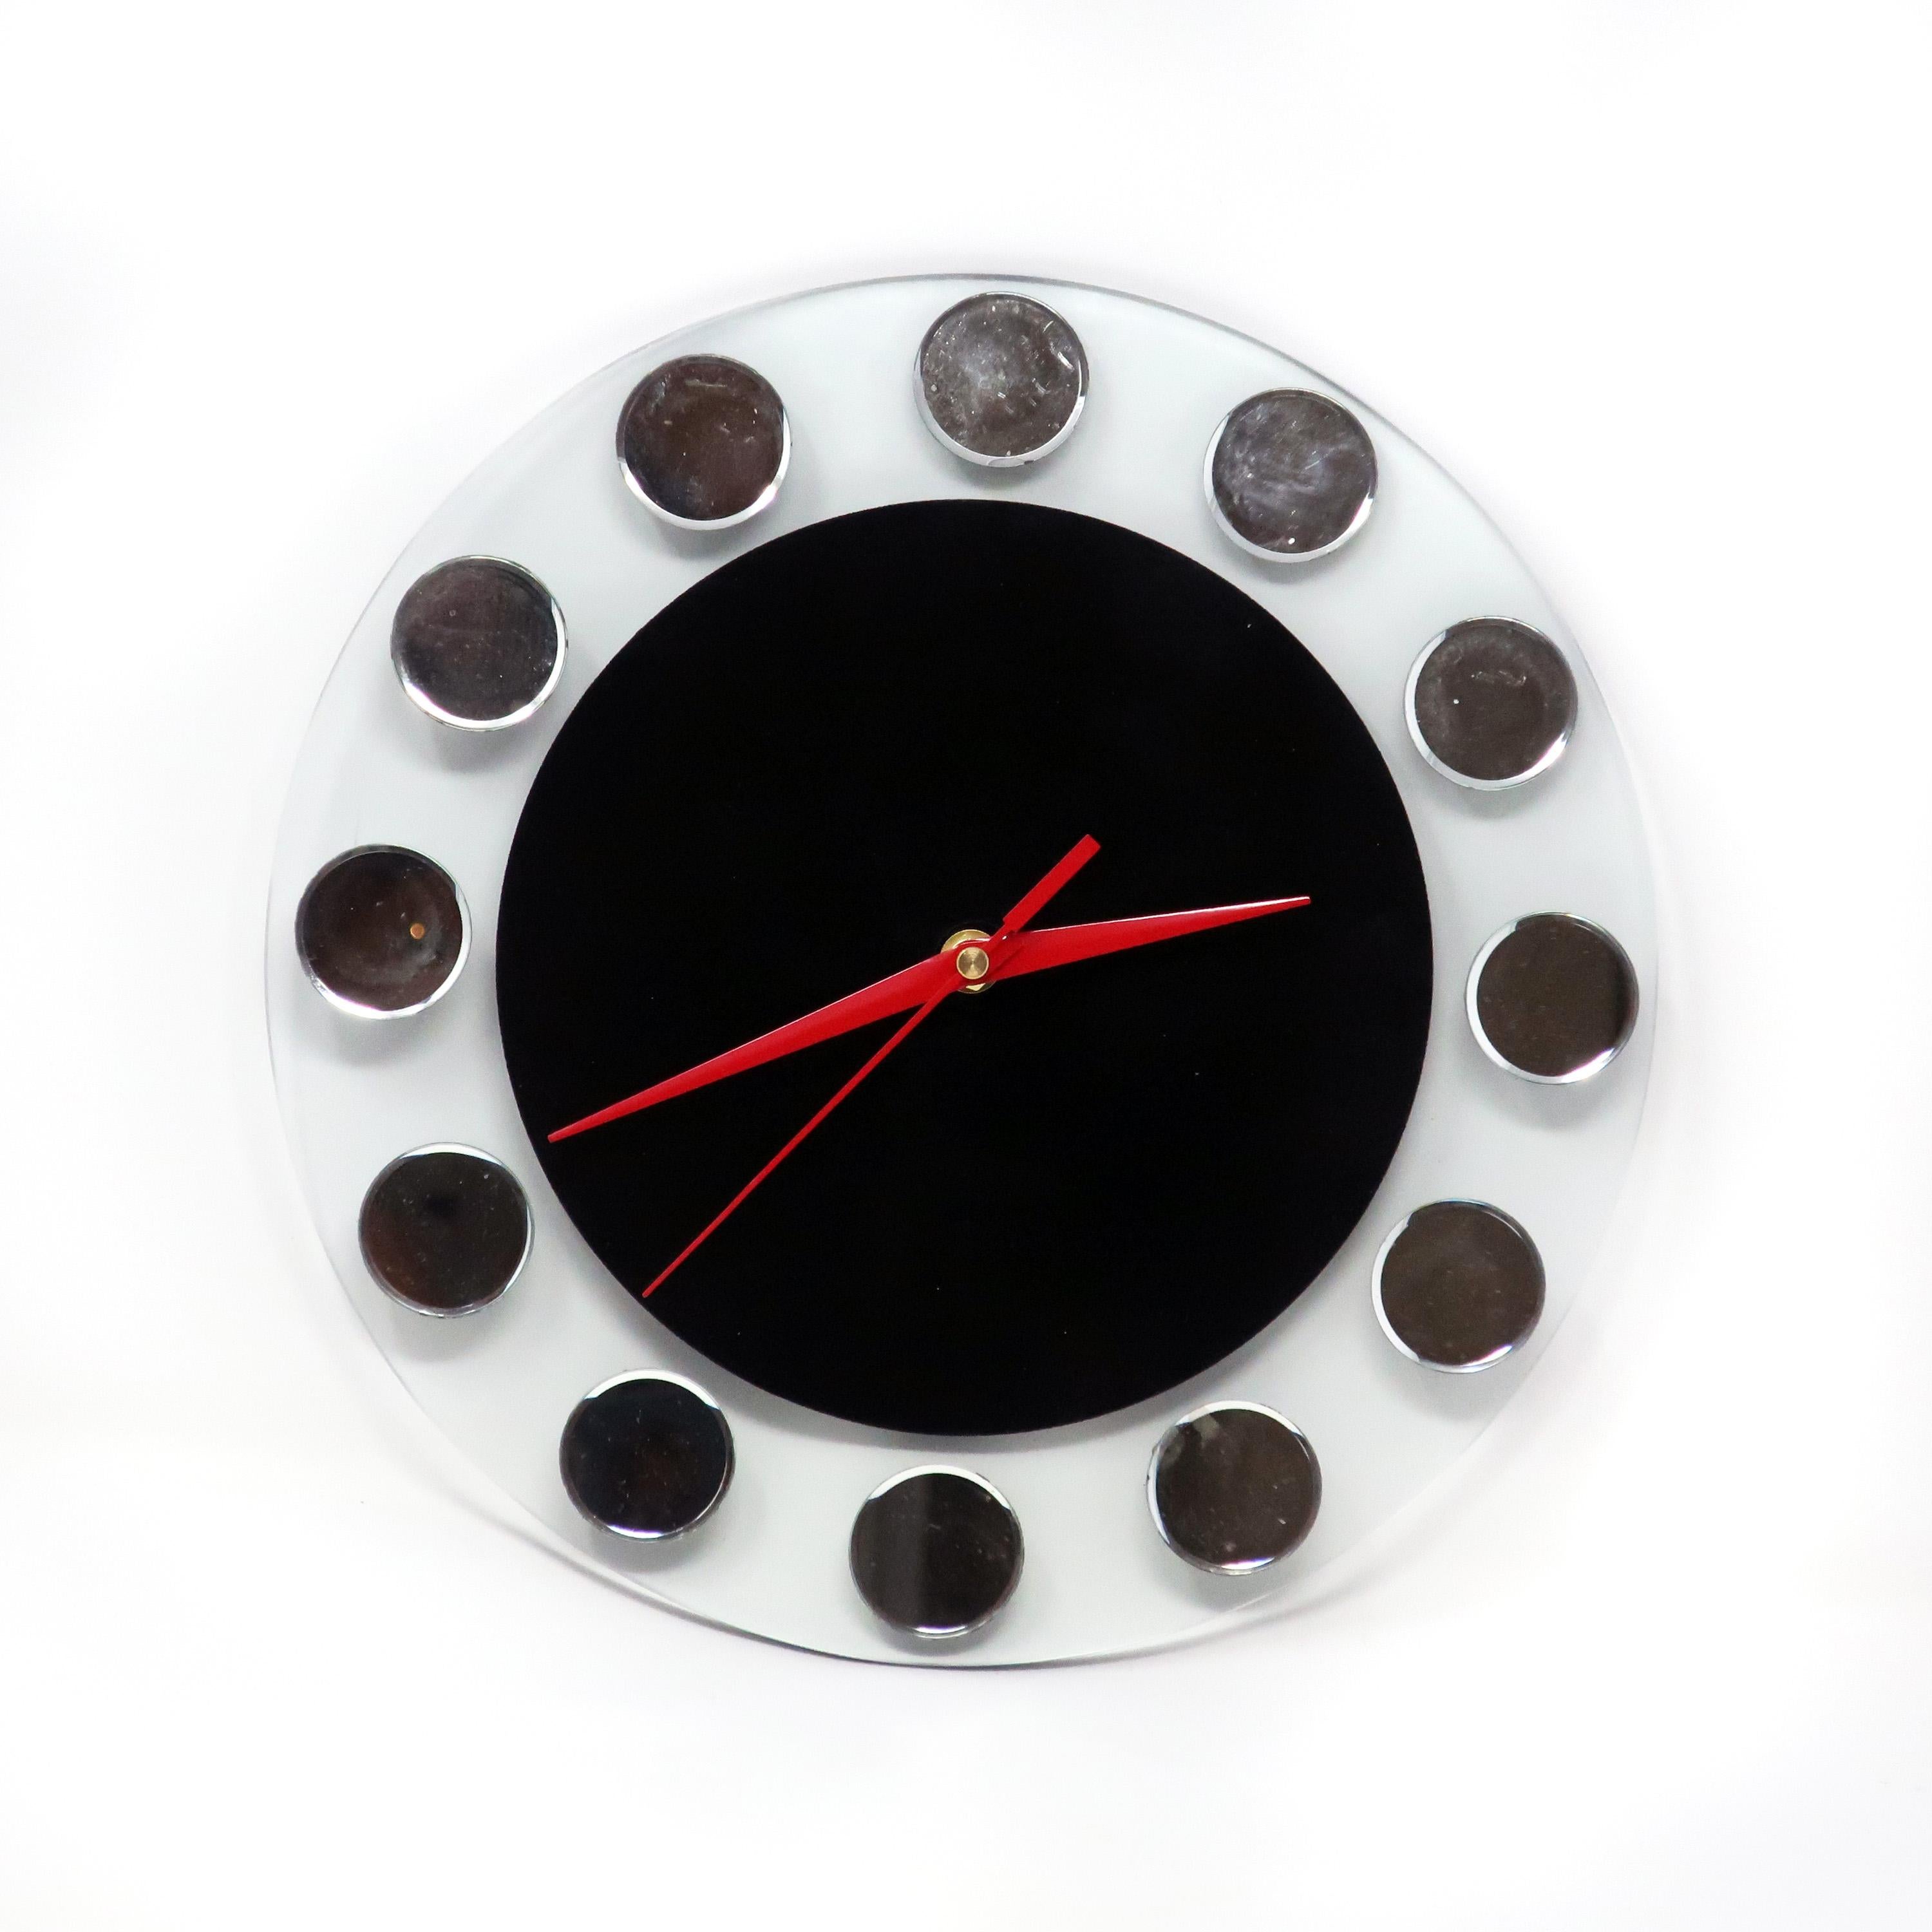 A Mid-Century Modern wall clock by Empire Art Products. On a clear round piece of glass, a black circle is reverse painted and twelve round mirrored pieces of glass are adhered for numbers. In good vintage condition with wear consistent with age and